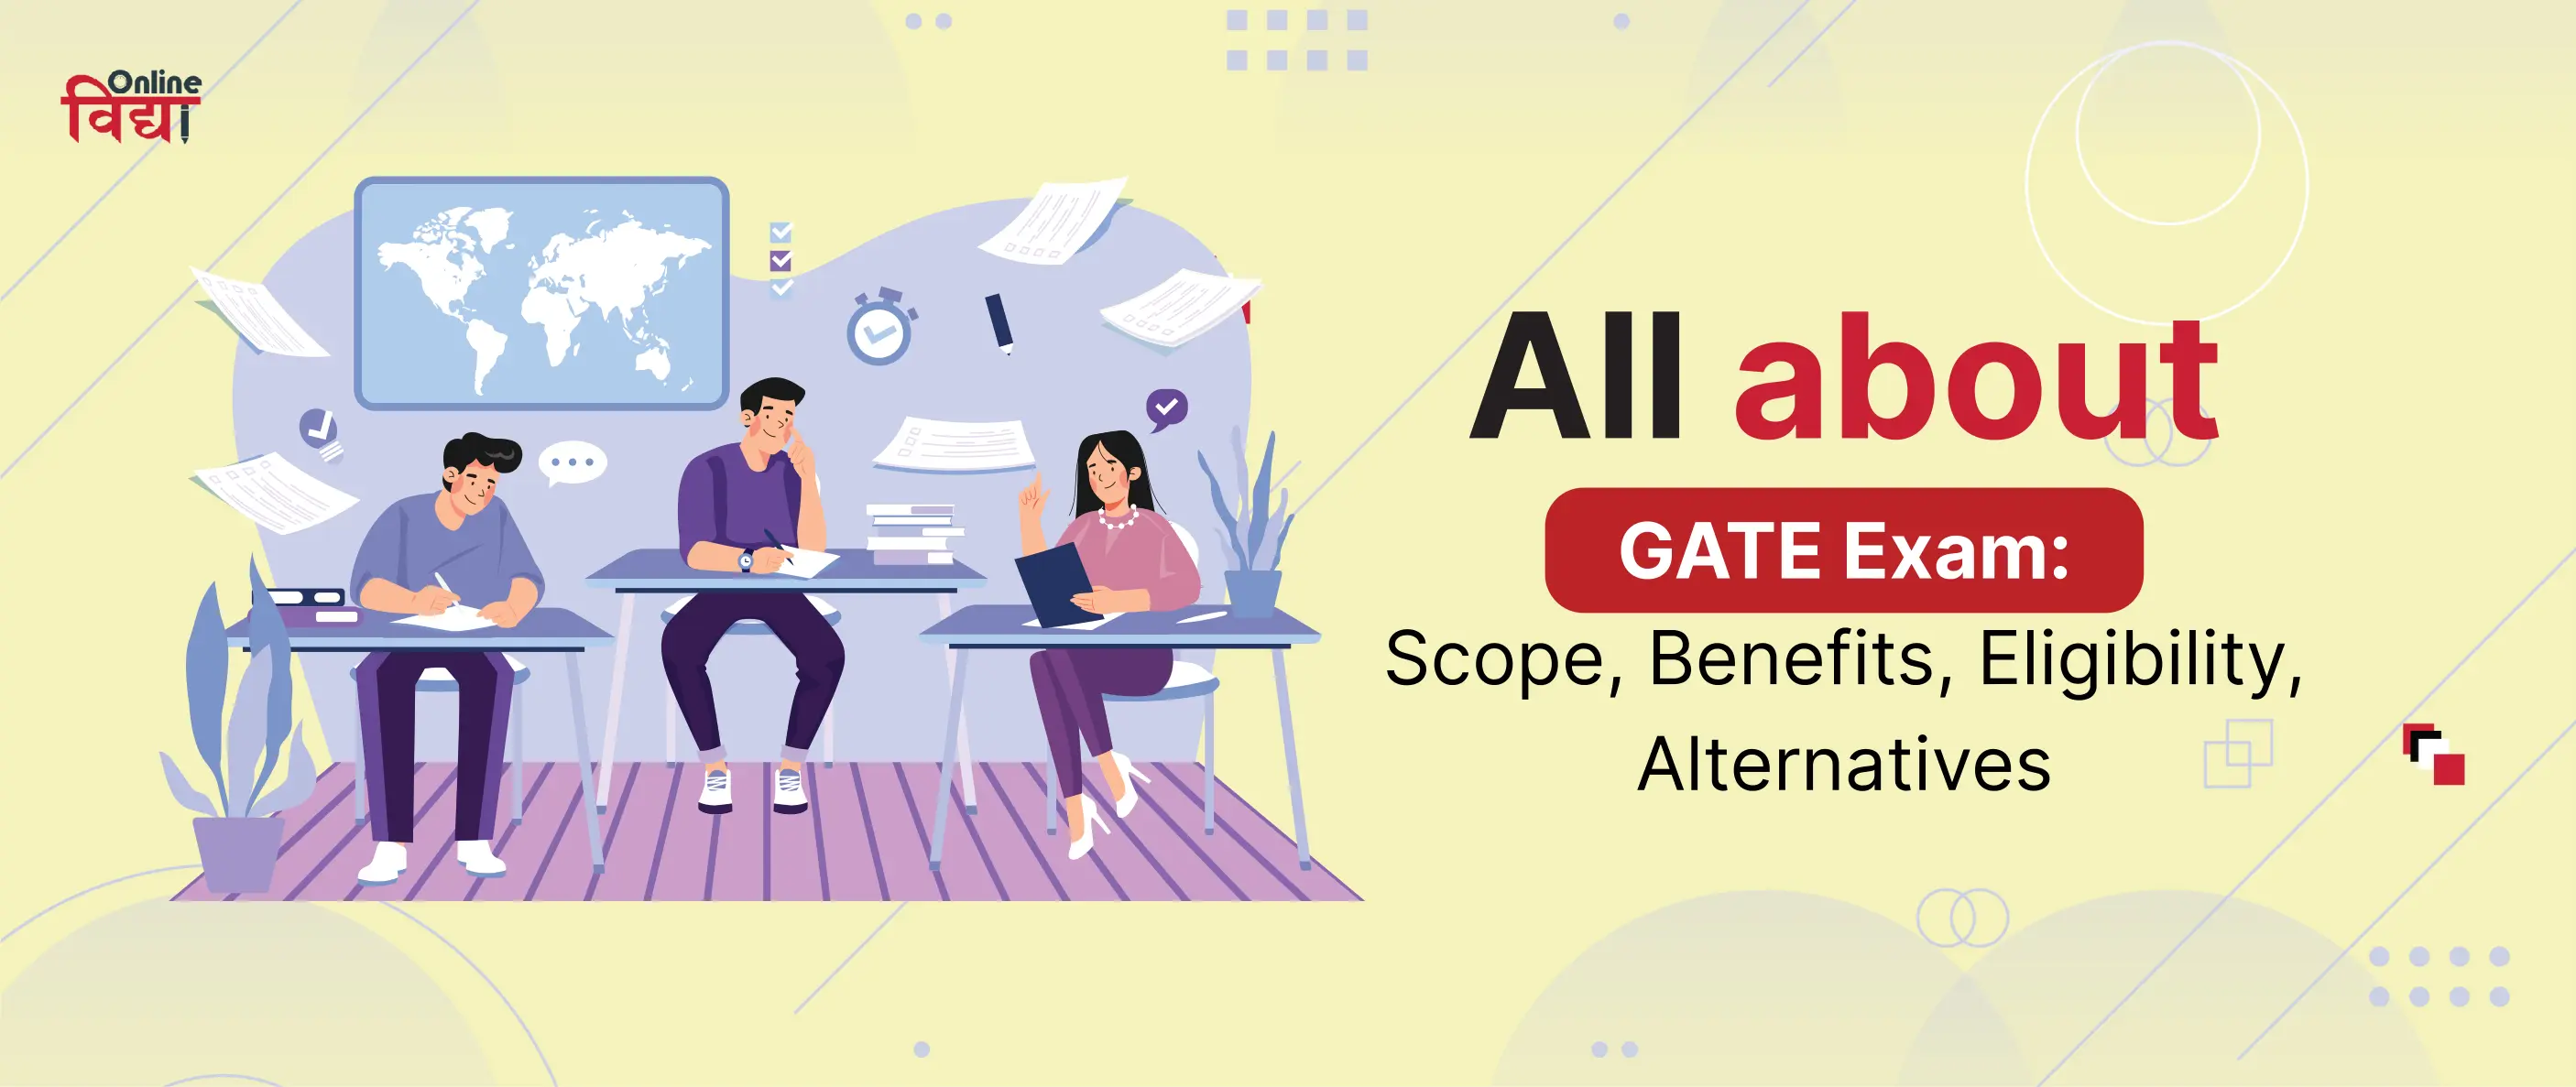 All about GATE Exam: Scope, Benefits, Eligibility, Alternatives